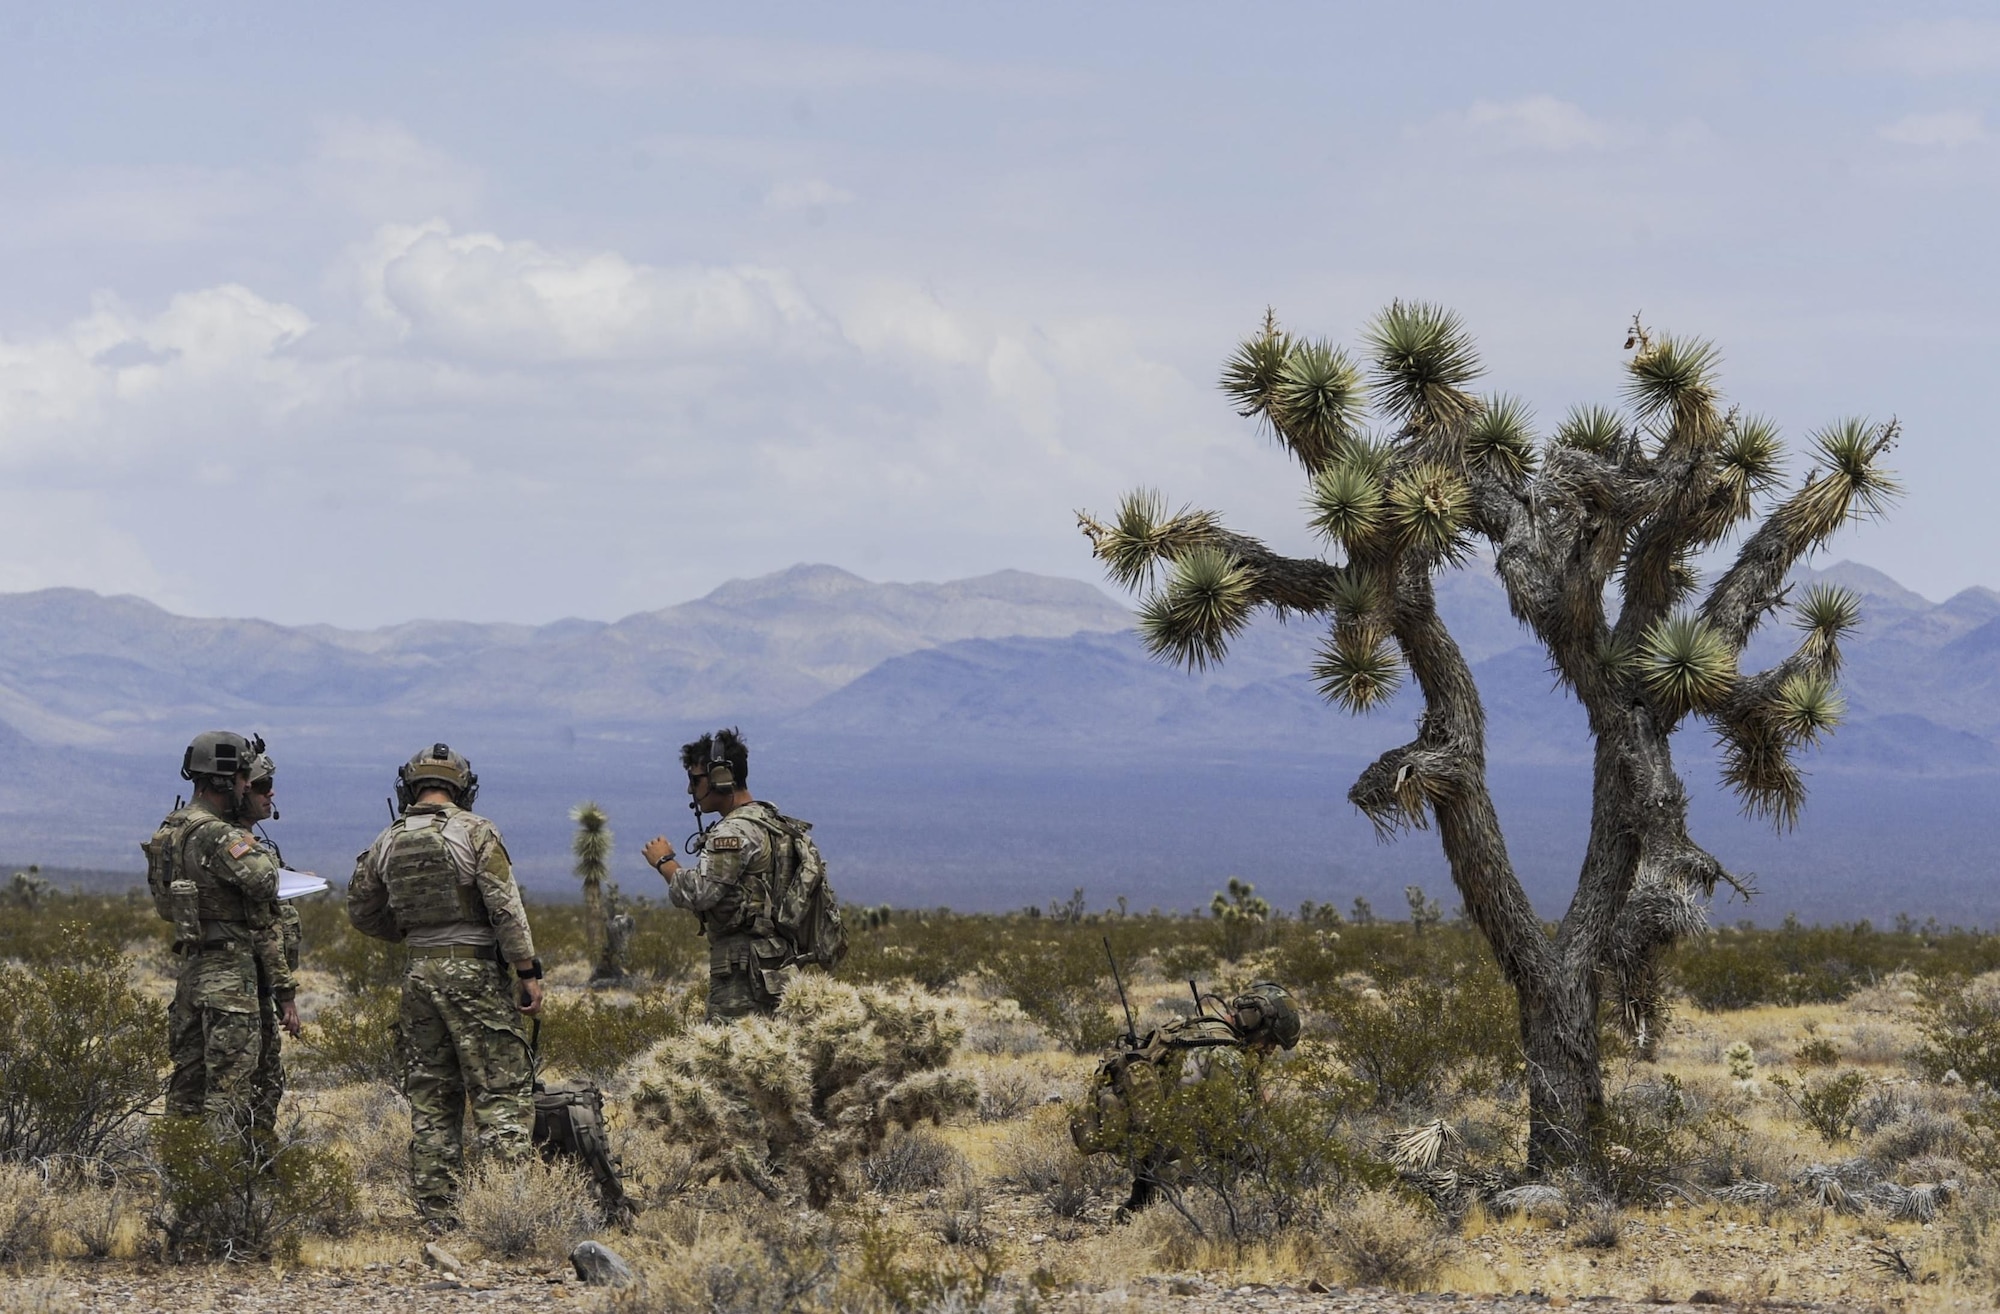 Joint terminal attack controllers prepare for a simulated training exercise on the Nevada Test and Training Range July 19, 2017. JTACs integrates air power into ground special operations for mission success, deploying into forward hostile areas to control offensive airstrike operations. (U.S. Air Force photo by Senior Airman Kevin Tanenbaum/Released)